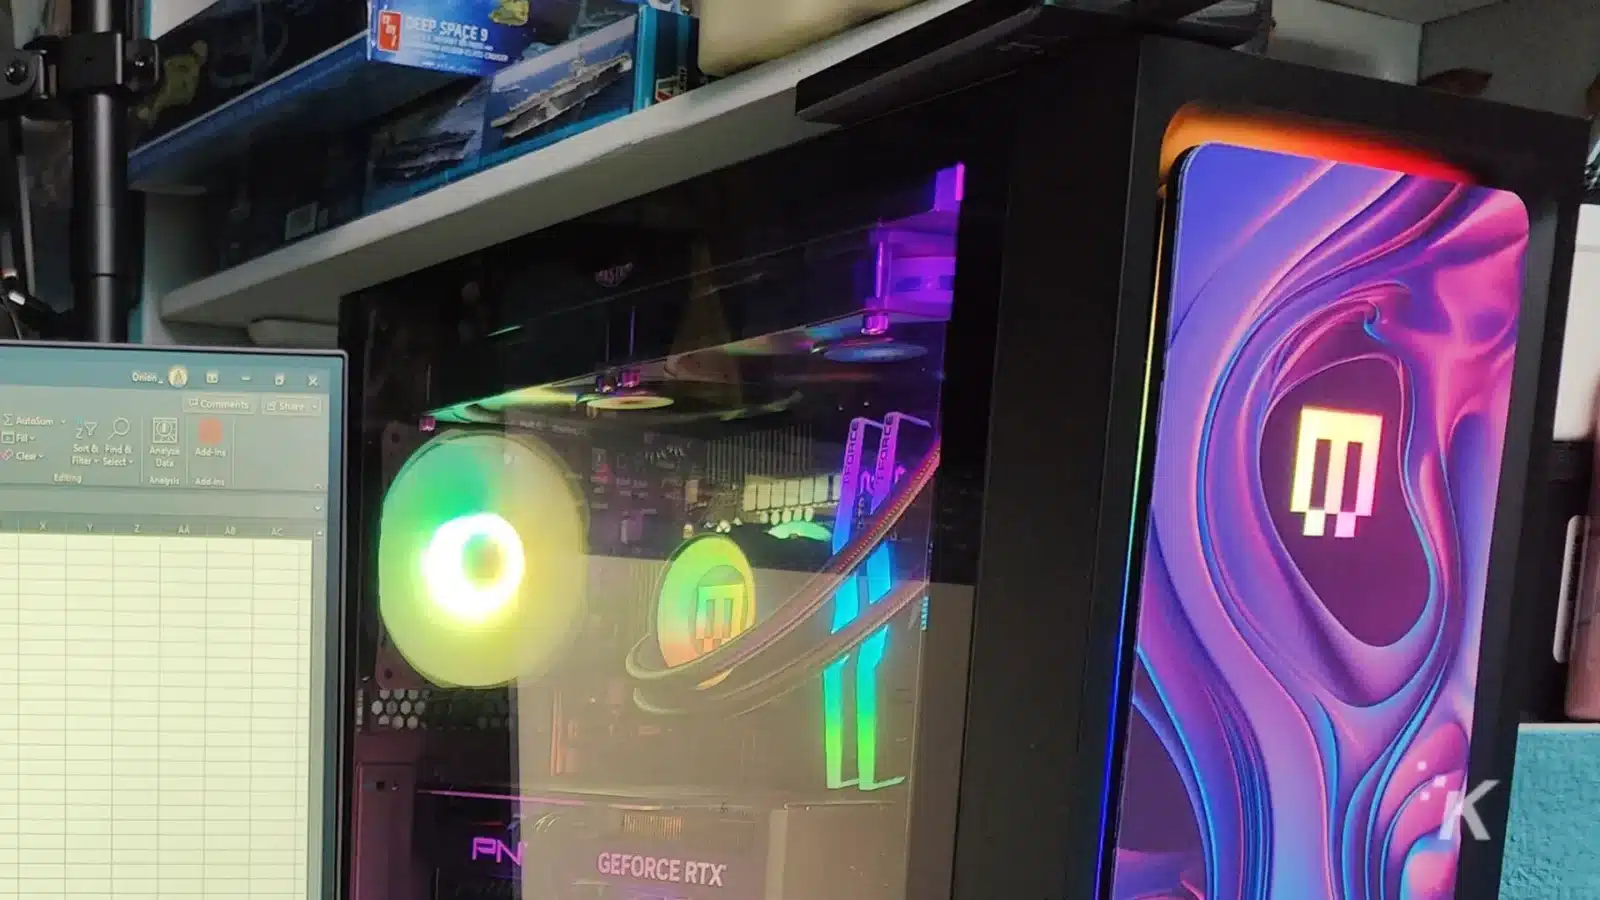 A desktop pc with rgb lighting visible through a clear side panel, featuring a geforce rtx graphics card, beside a monitor with colorful wallpaper.